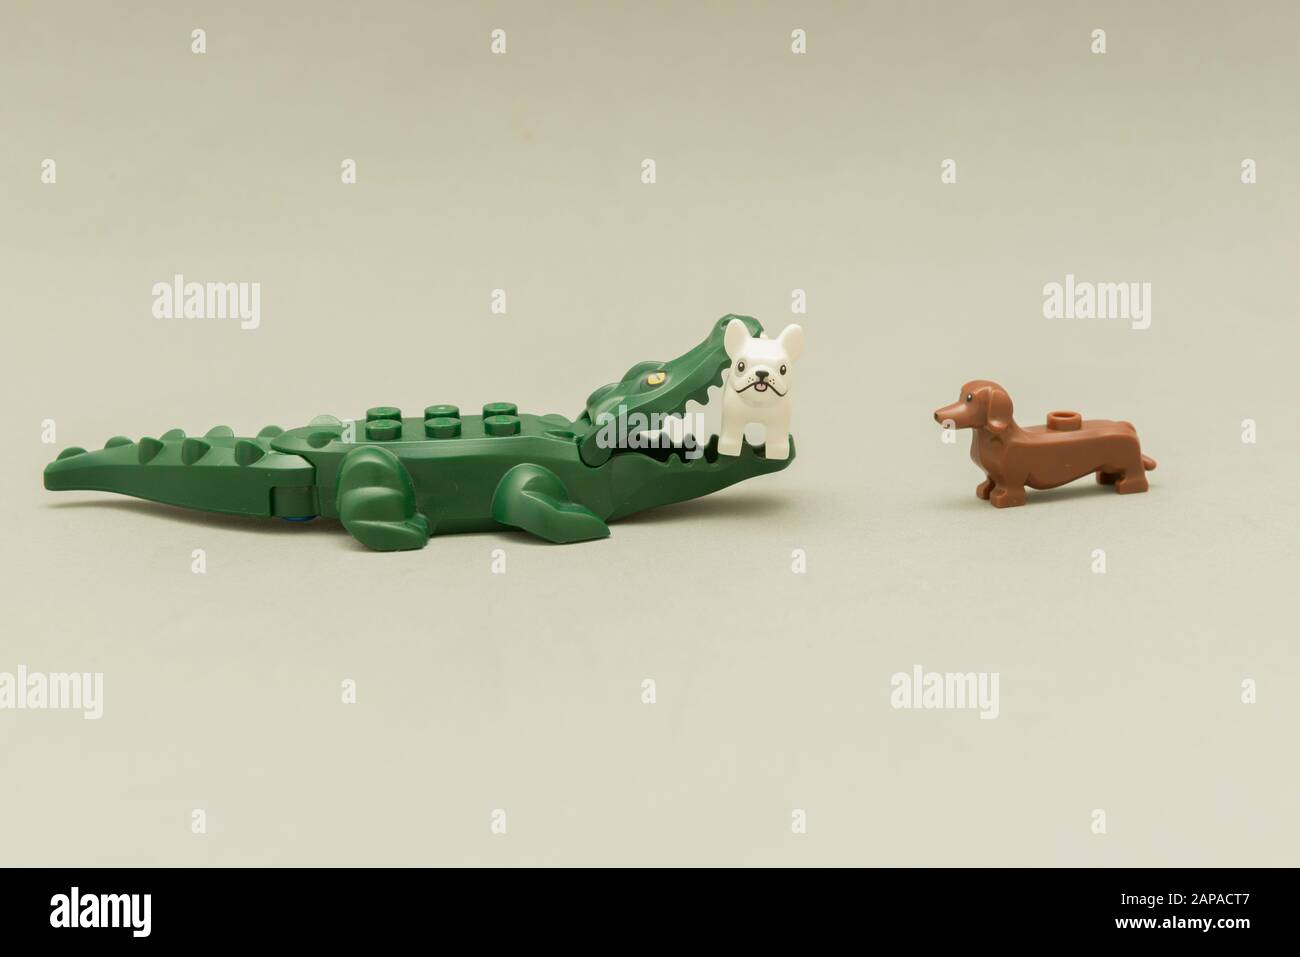 - Brazil, May 5, 2019: Lego minifigures - alligator a dog with its mouth full of teeth. Wild animals versus domestic animals. Leg Stock Photo - Alamy